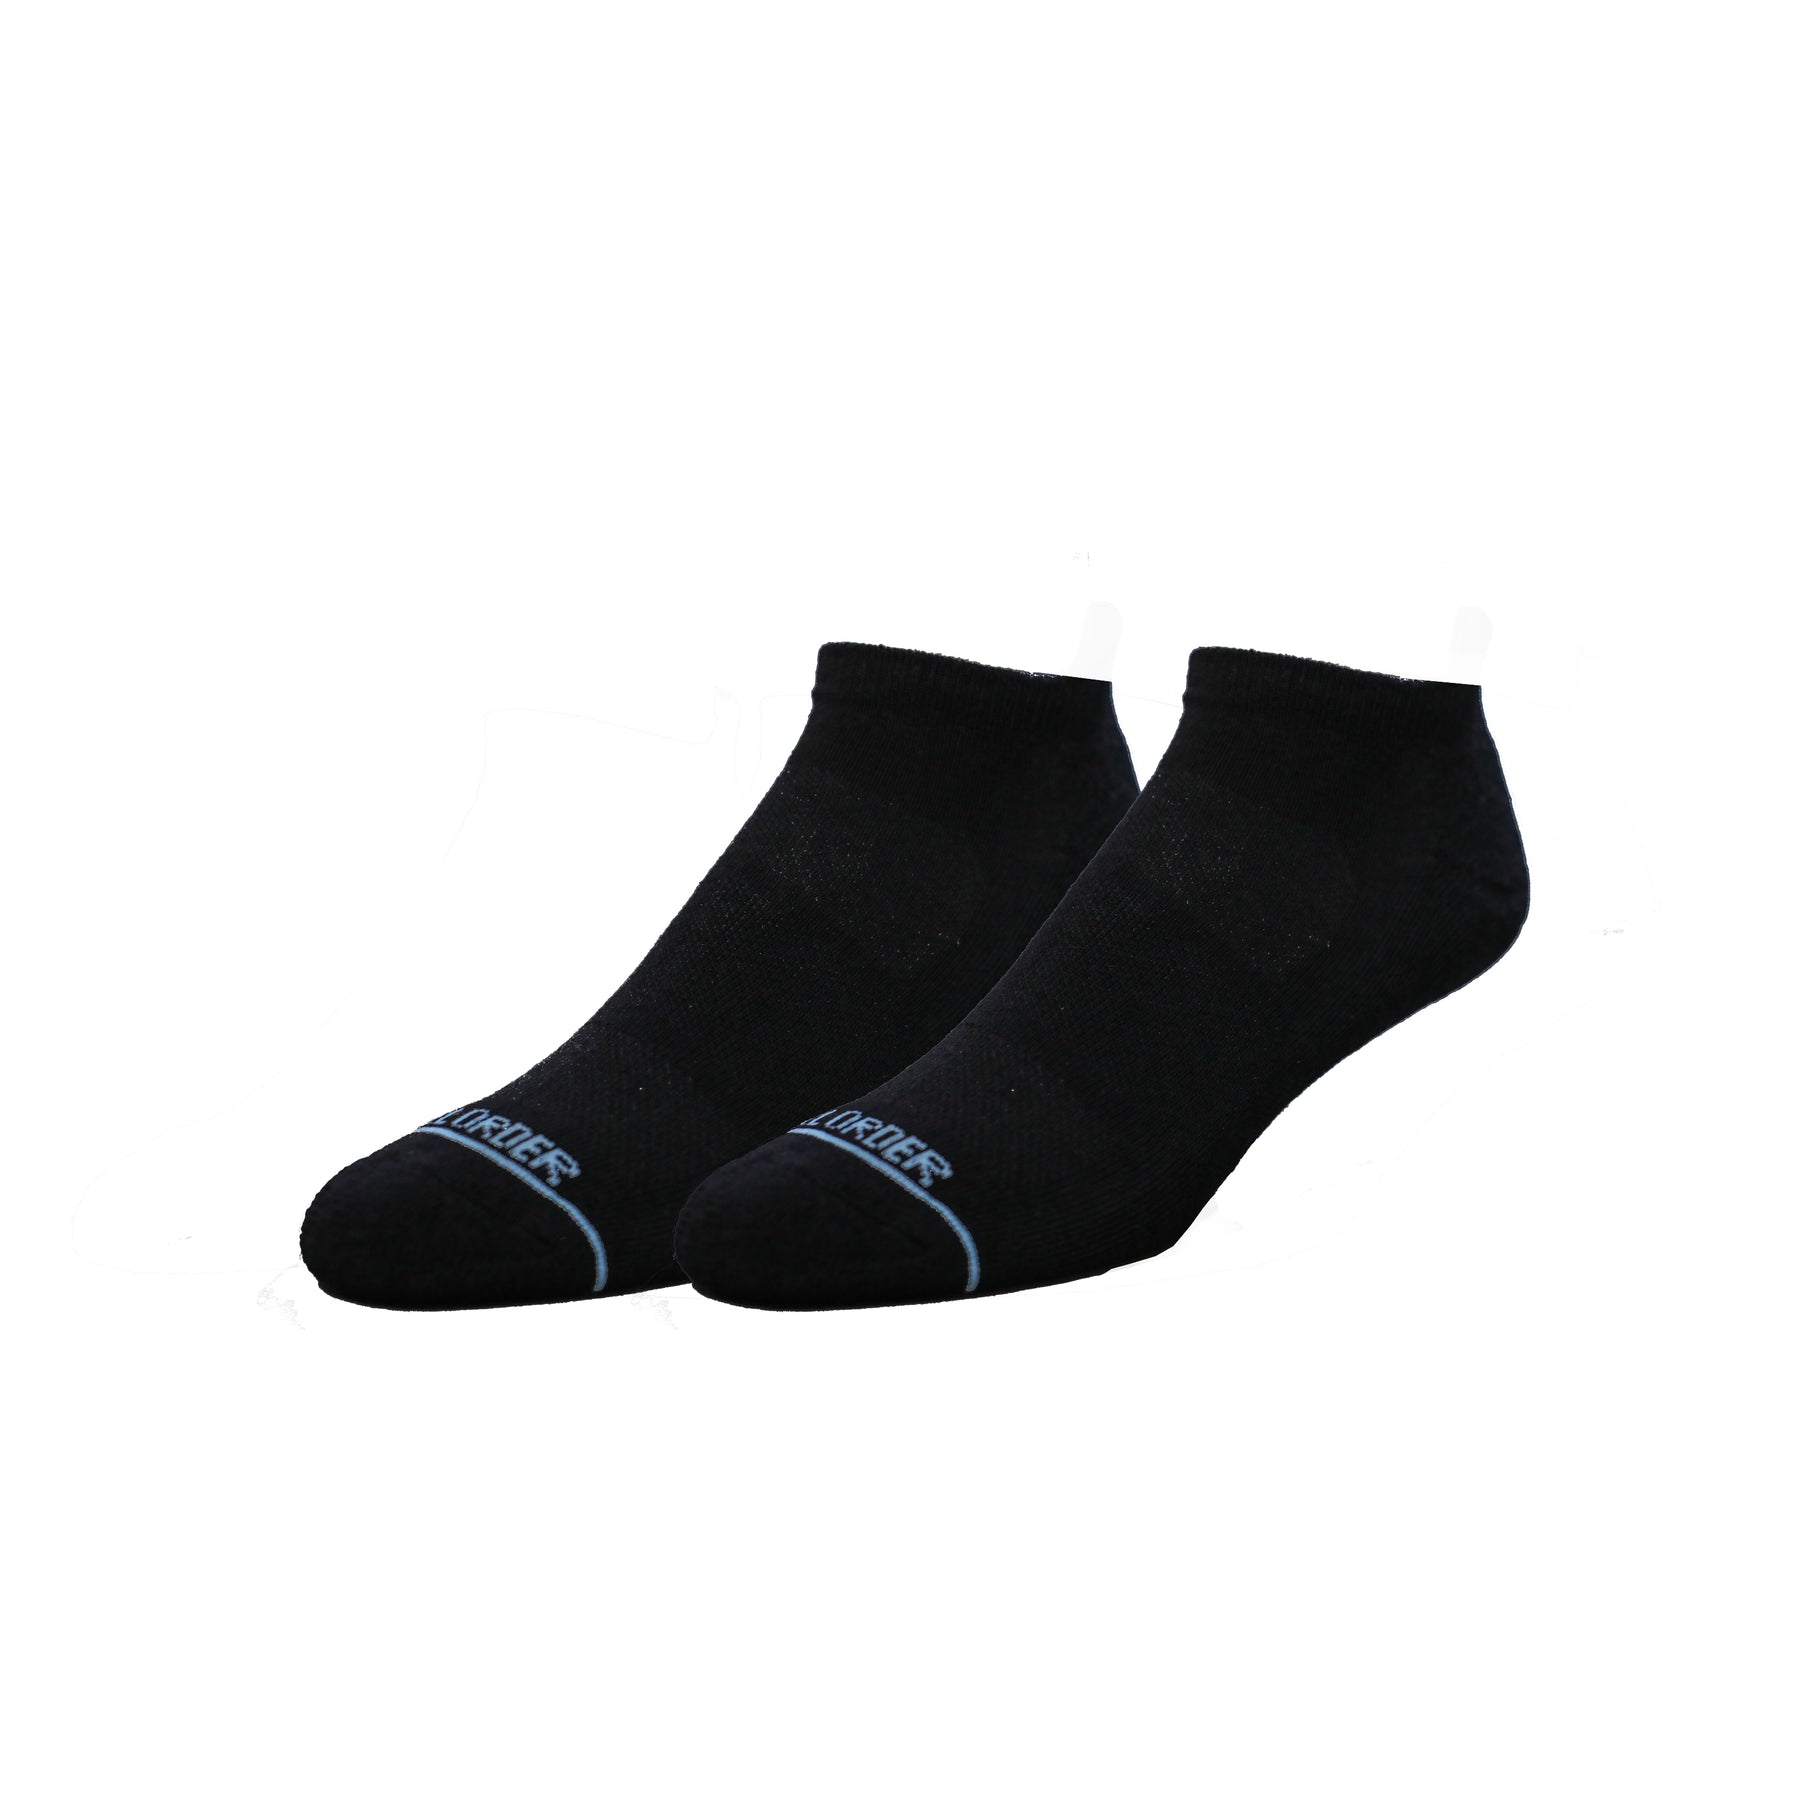 Extra Cushioned Low Socks (2 Pack)